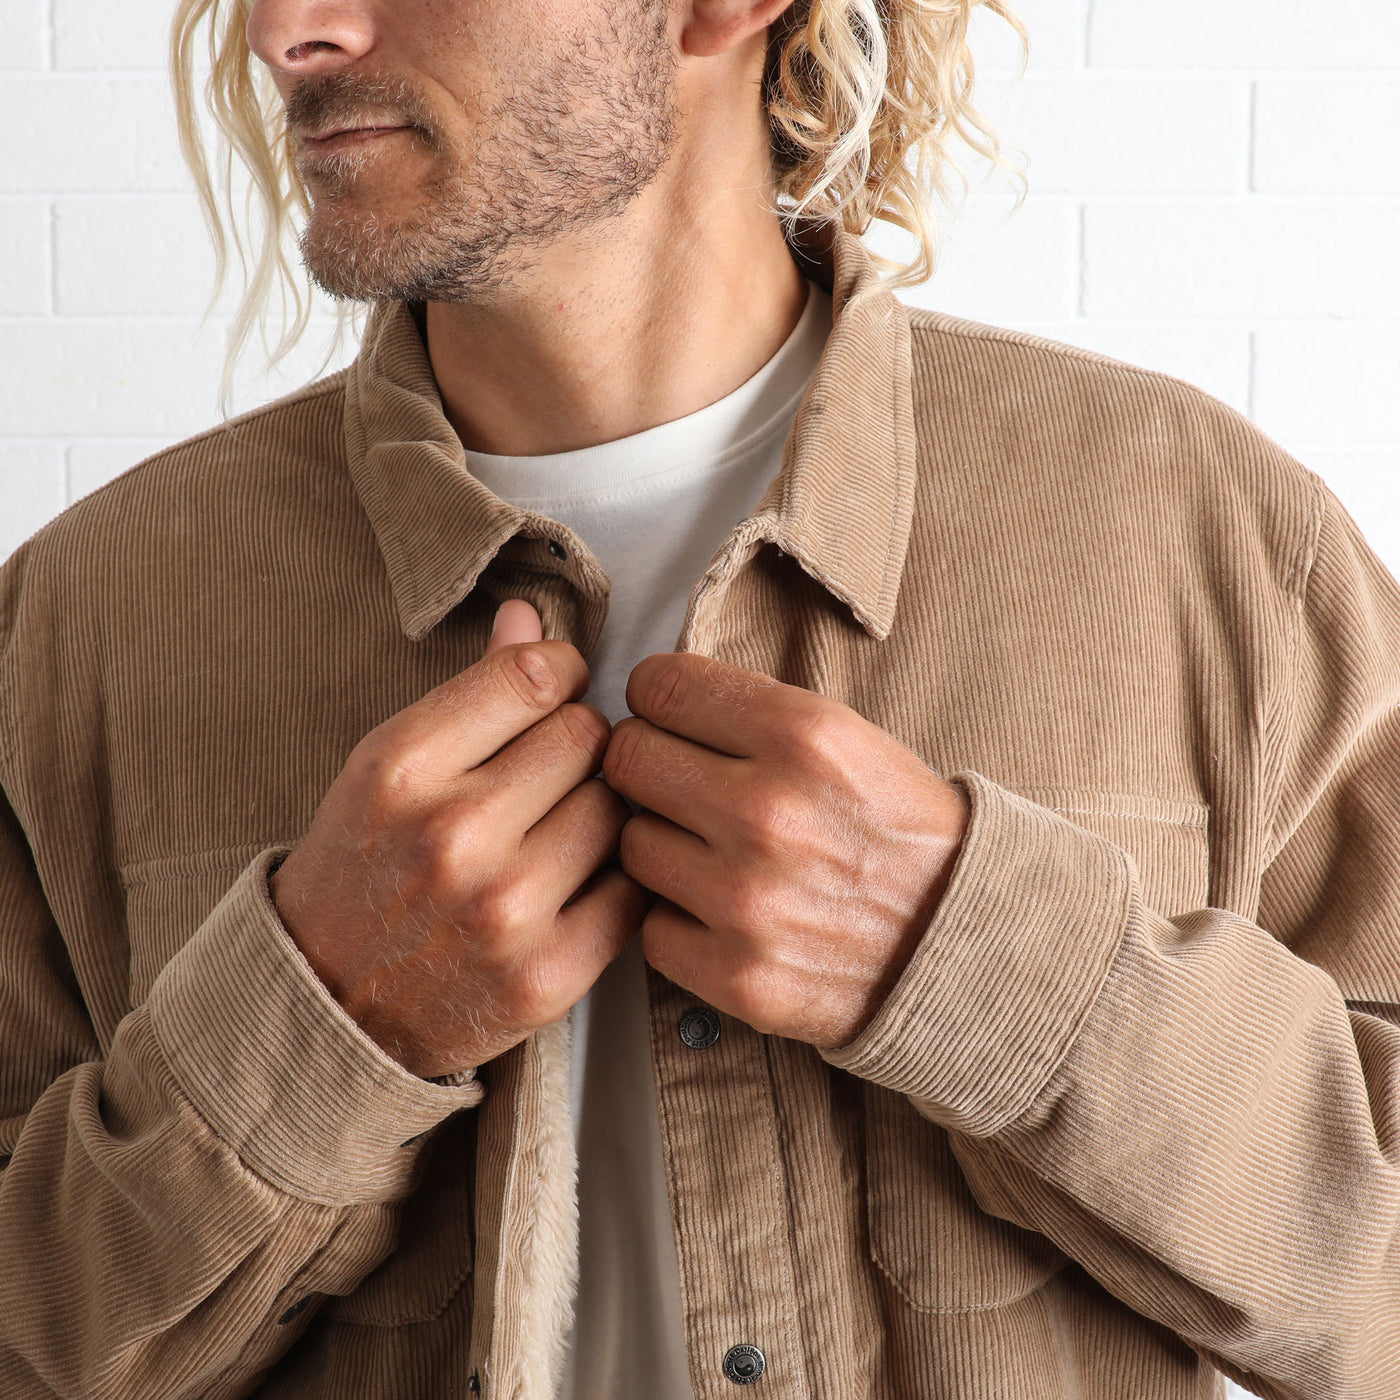 The Ranch Cord Jacket - Earth